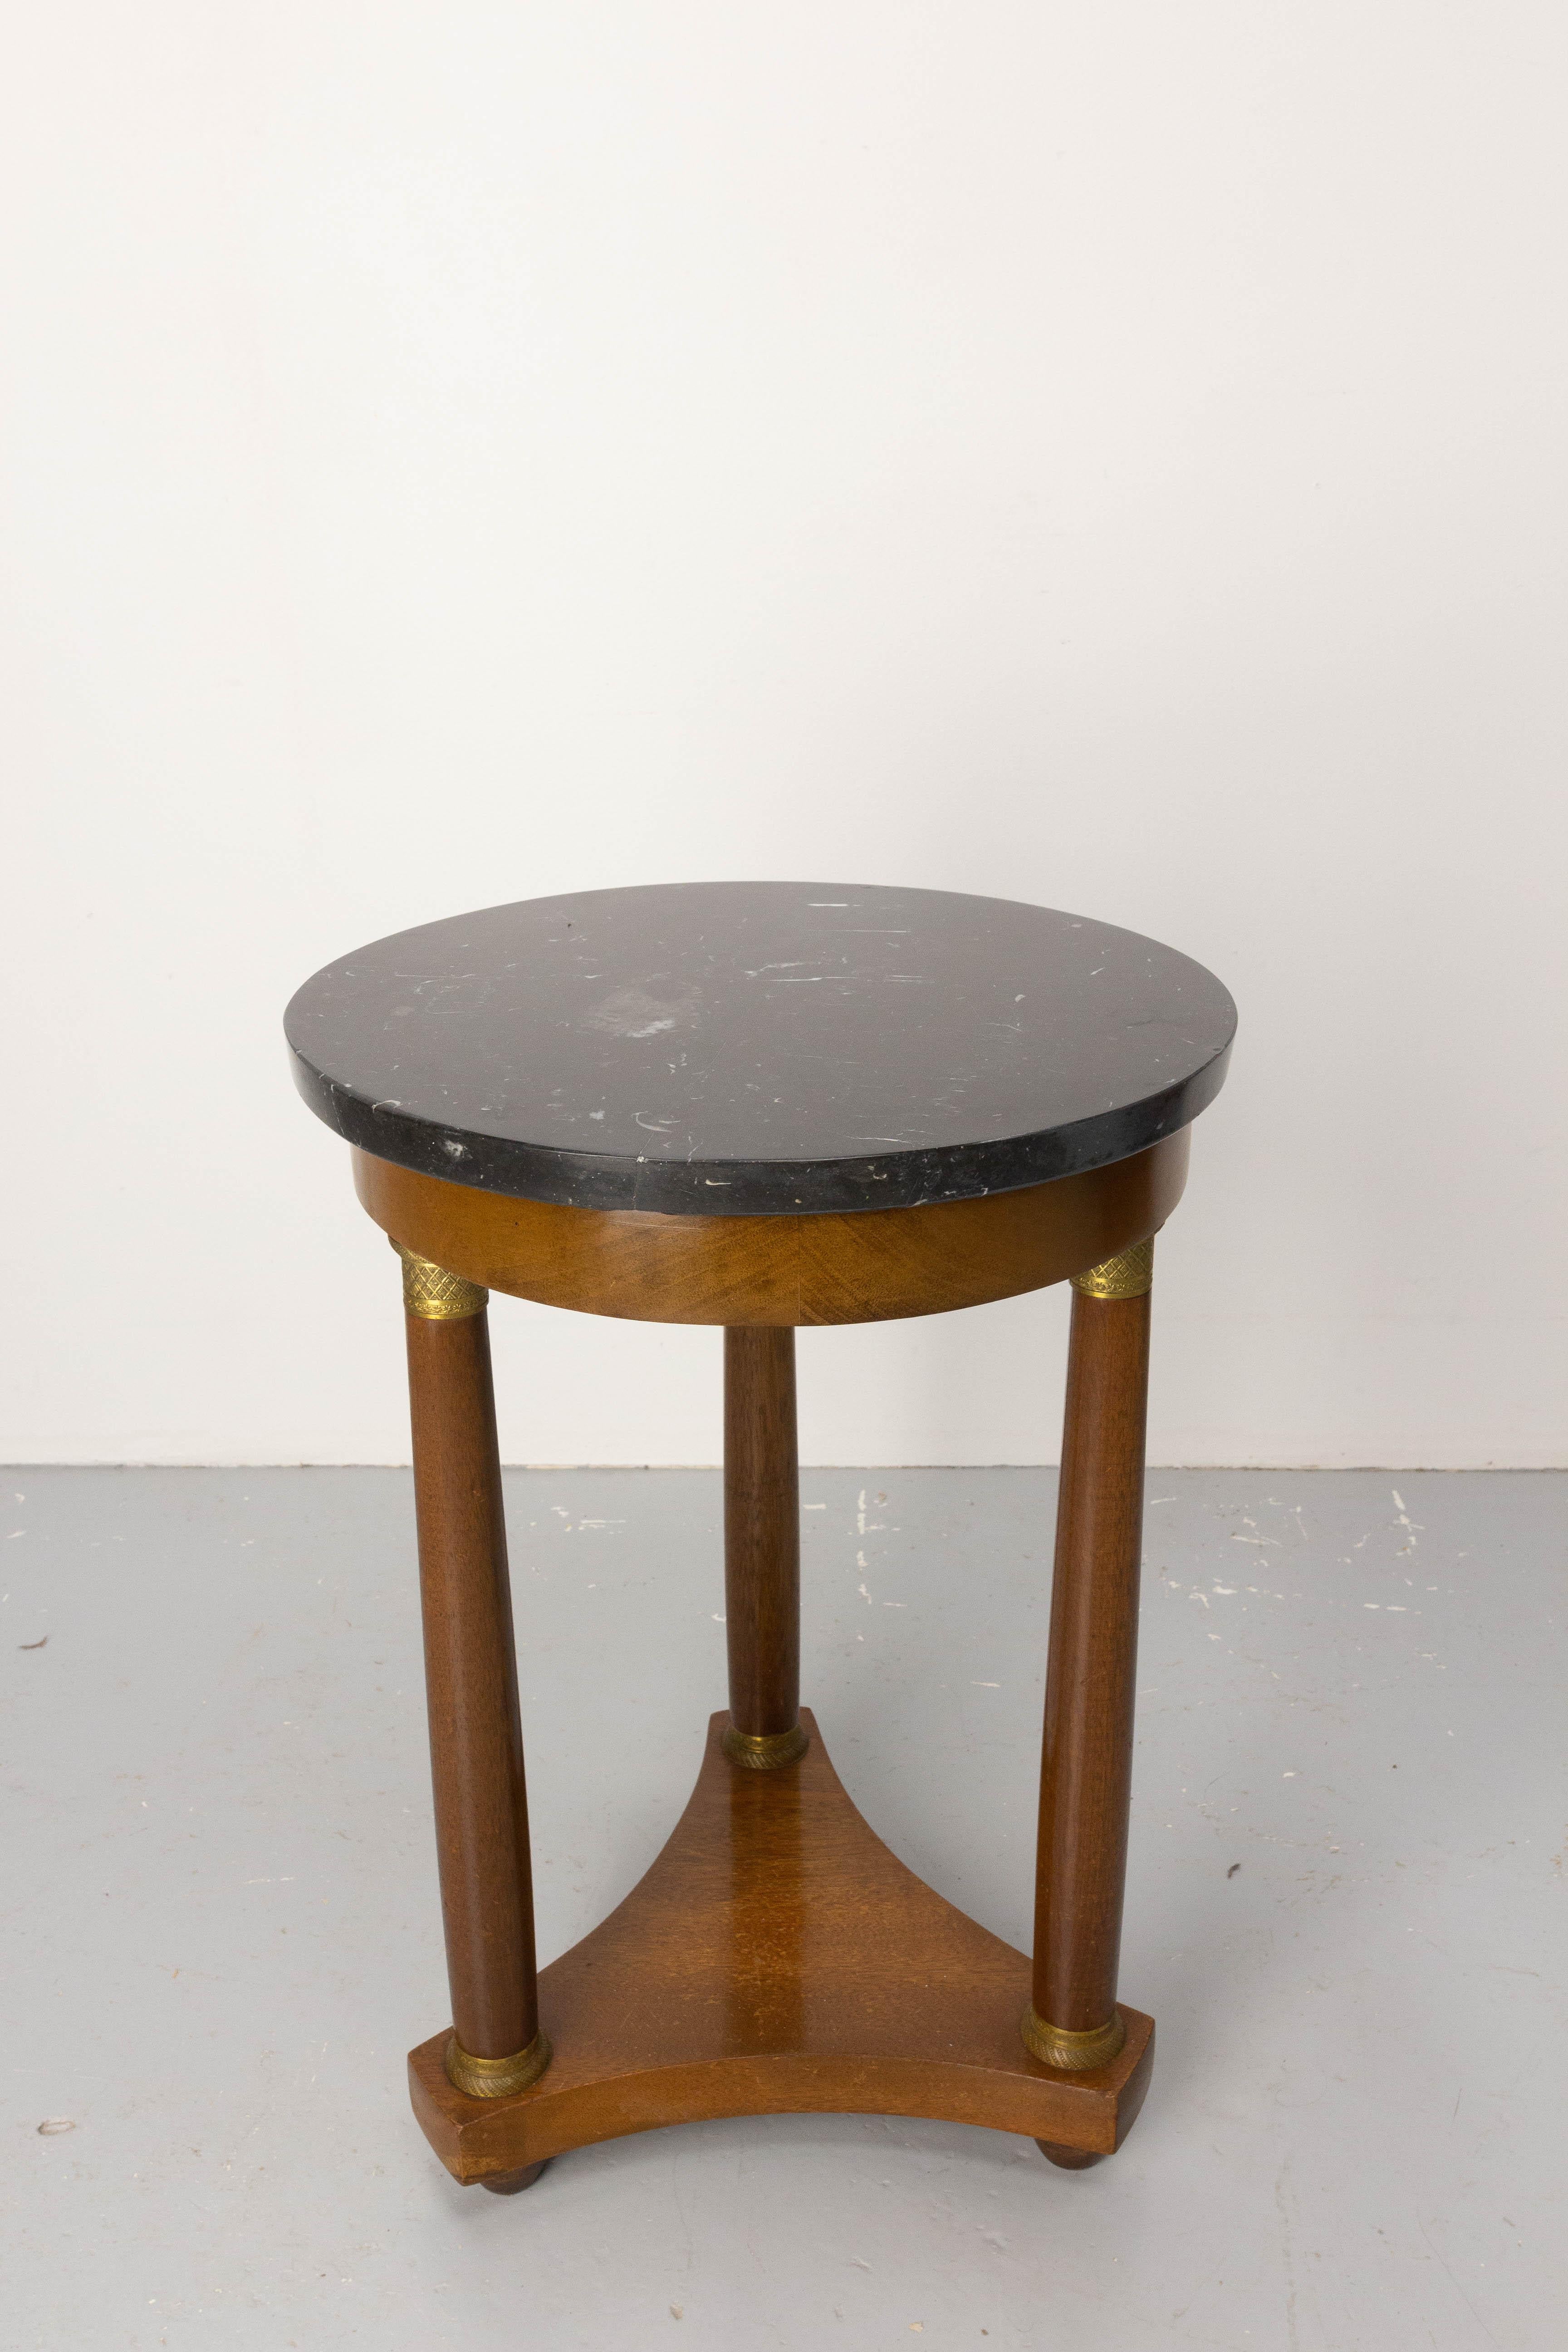 Wood French 1960 Iroko & Marble Sellette or Plant Holder Three Legs Empire St, c 1960 For Sale